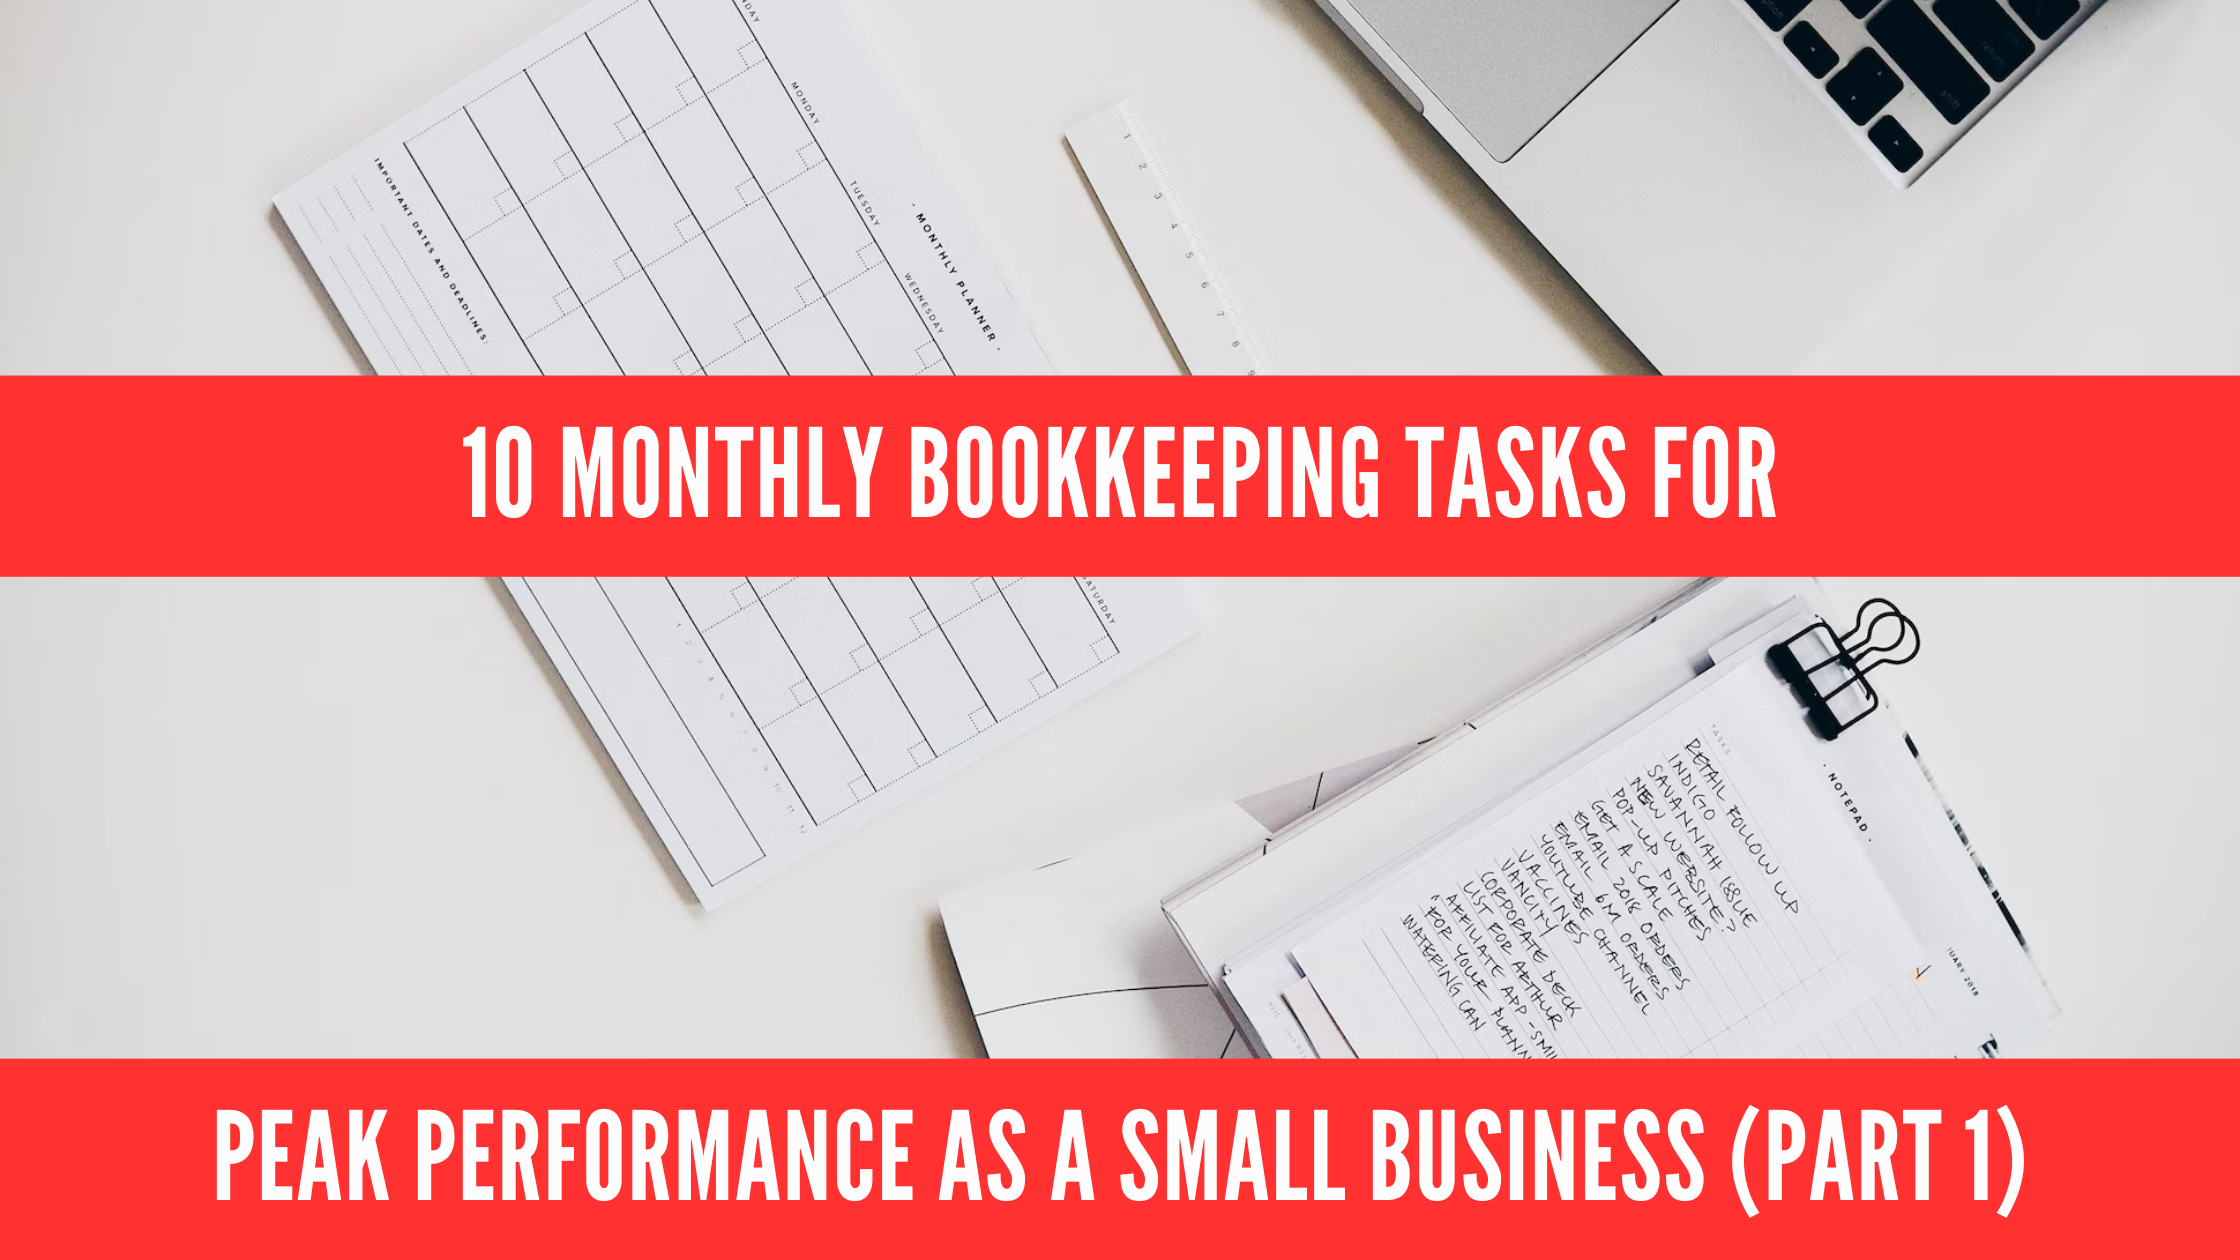 Monthly bookkeeping tasks for peak performance as a small business